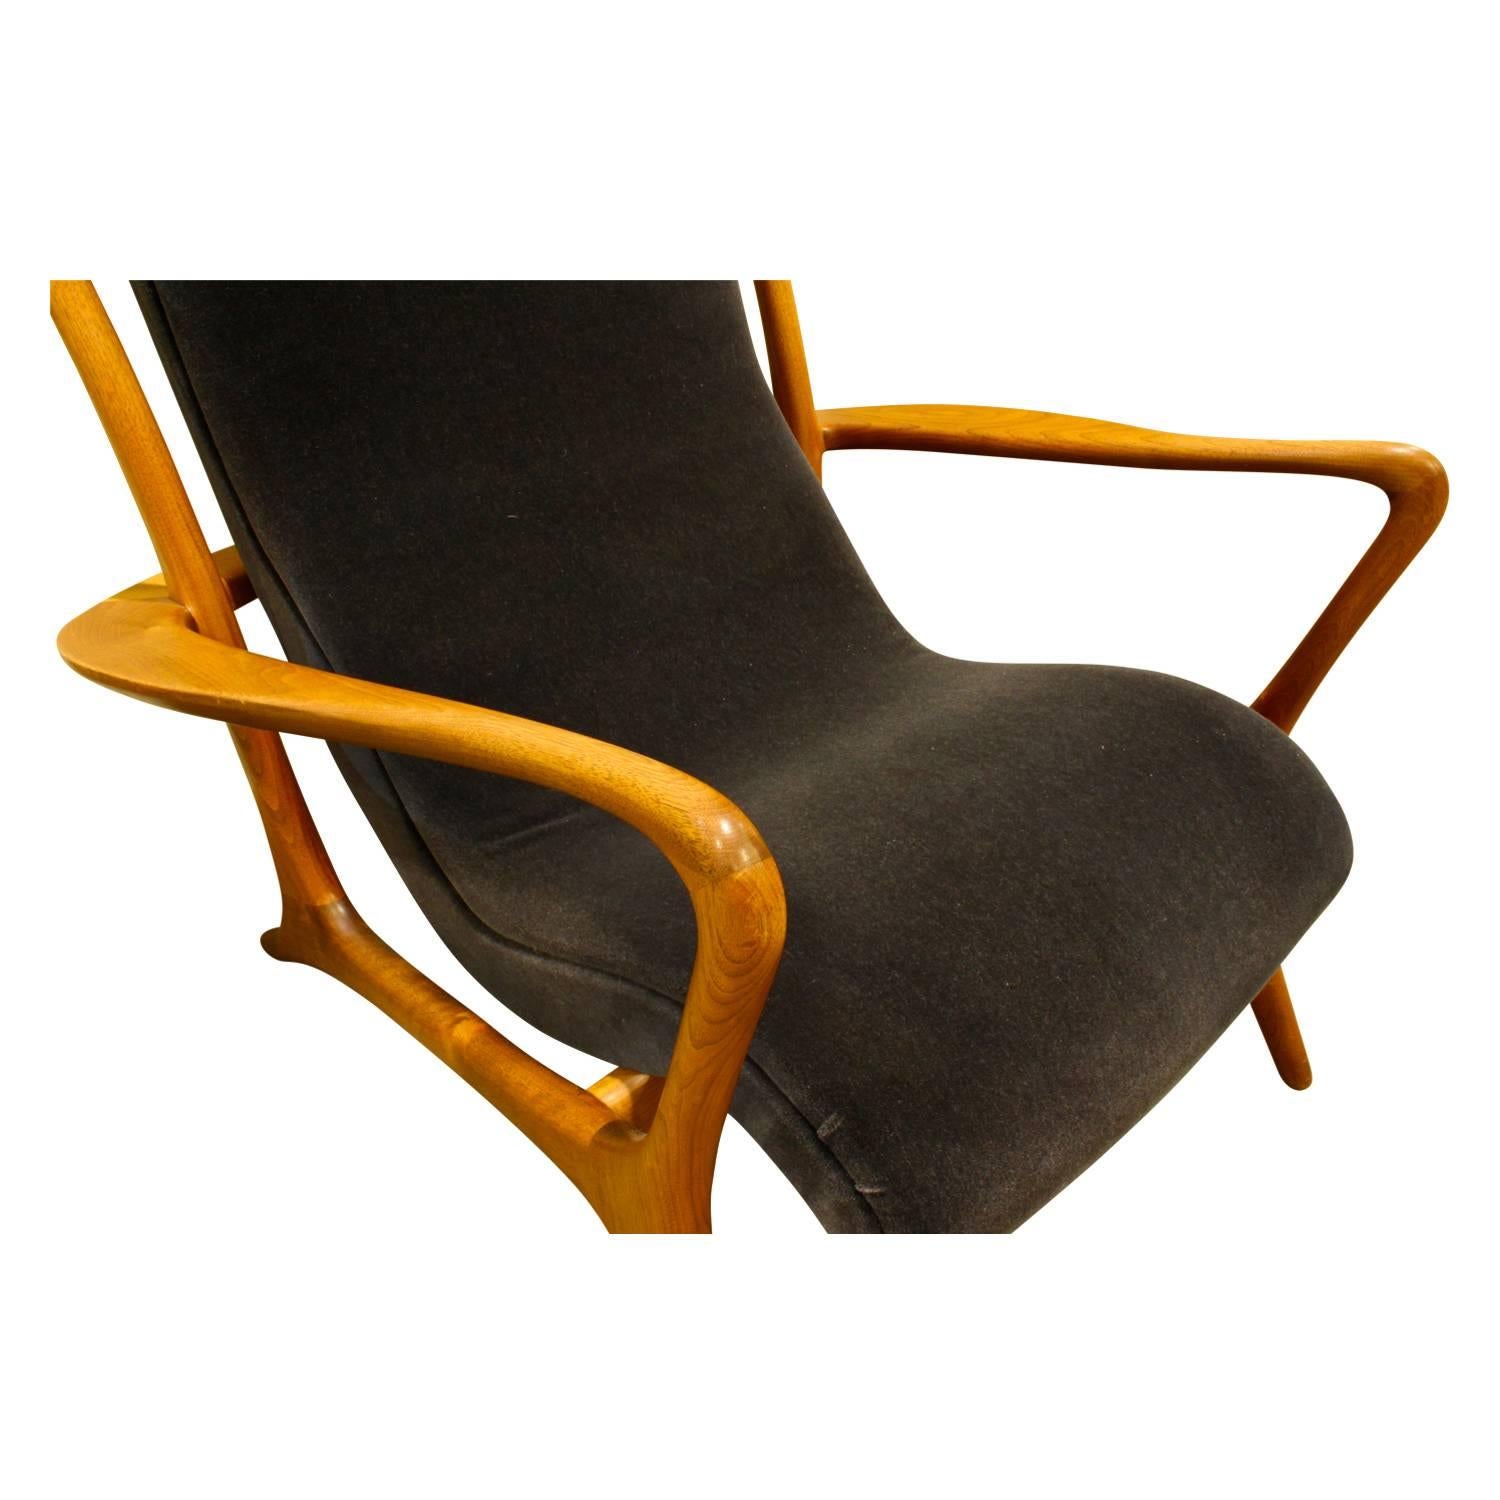 Hand-Crafted Vladimir Kagan Sculpted Contour Chair, 1950s